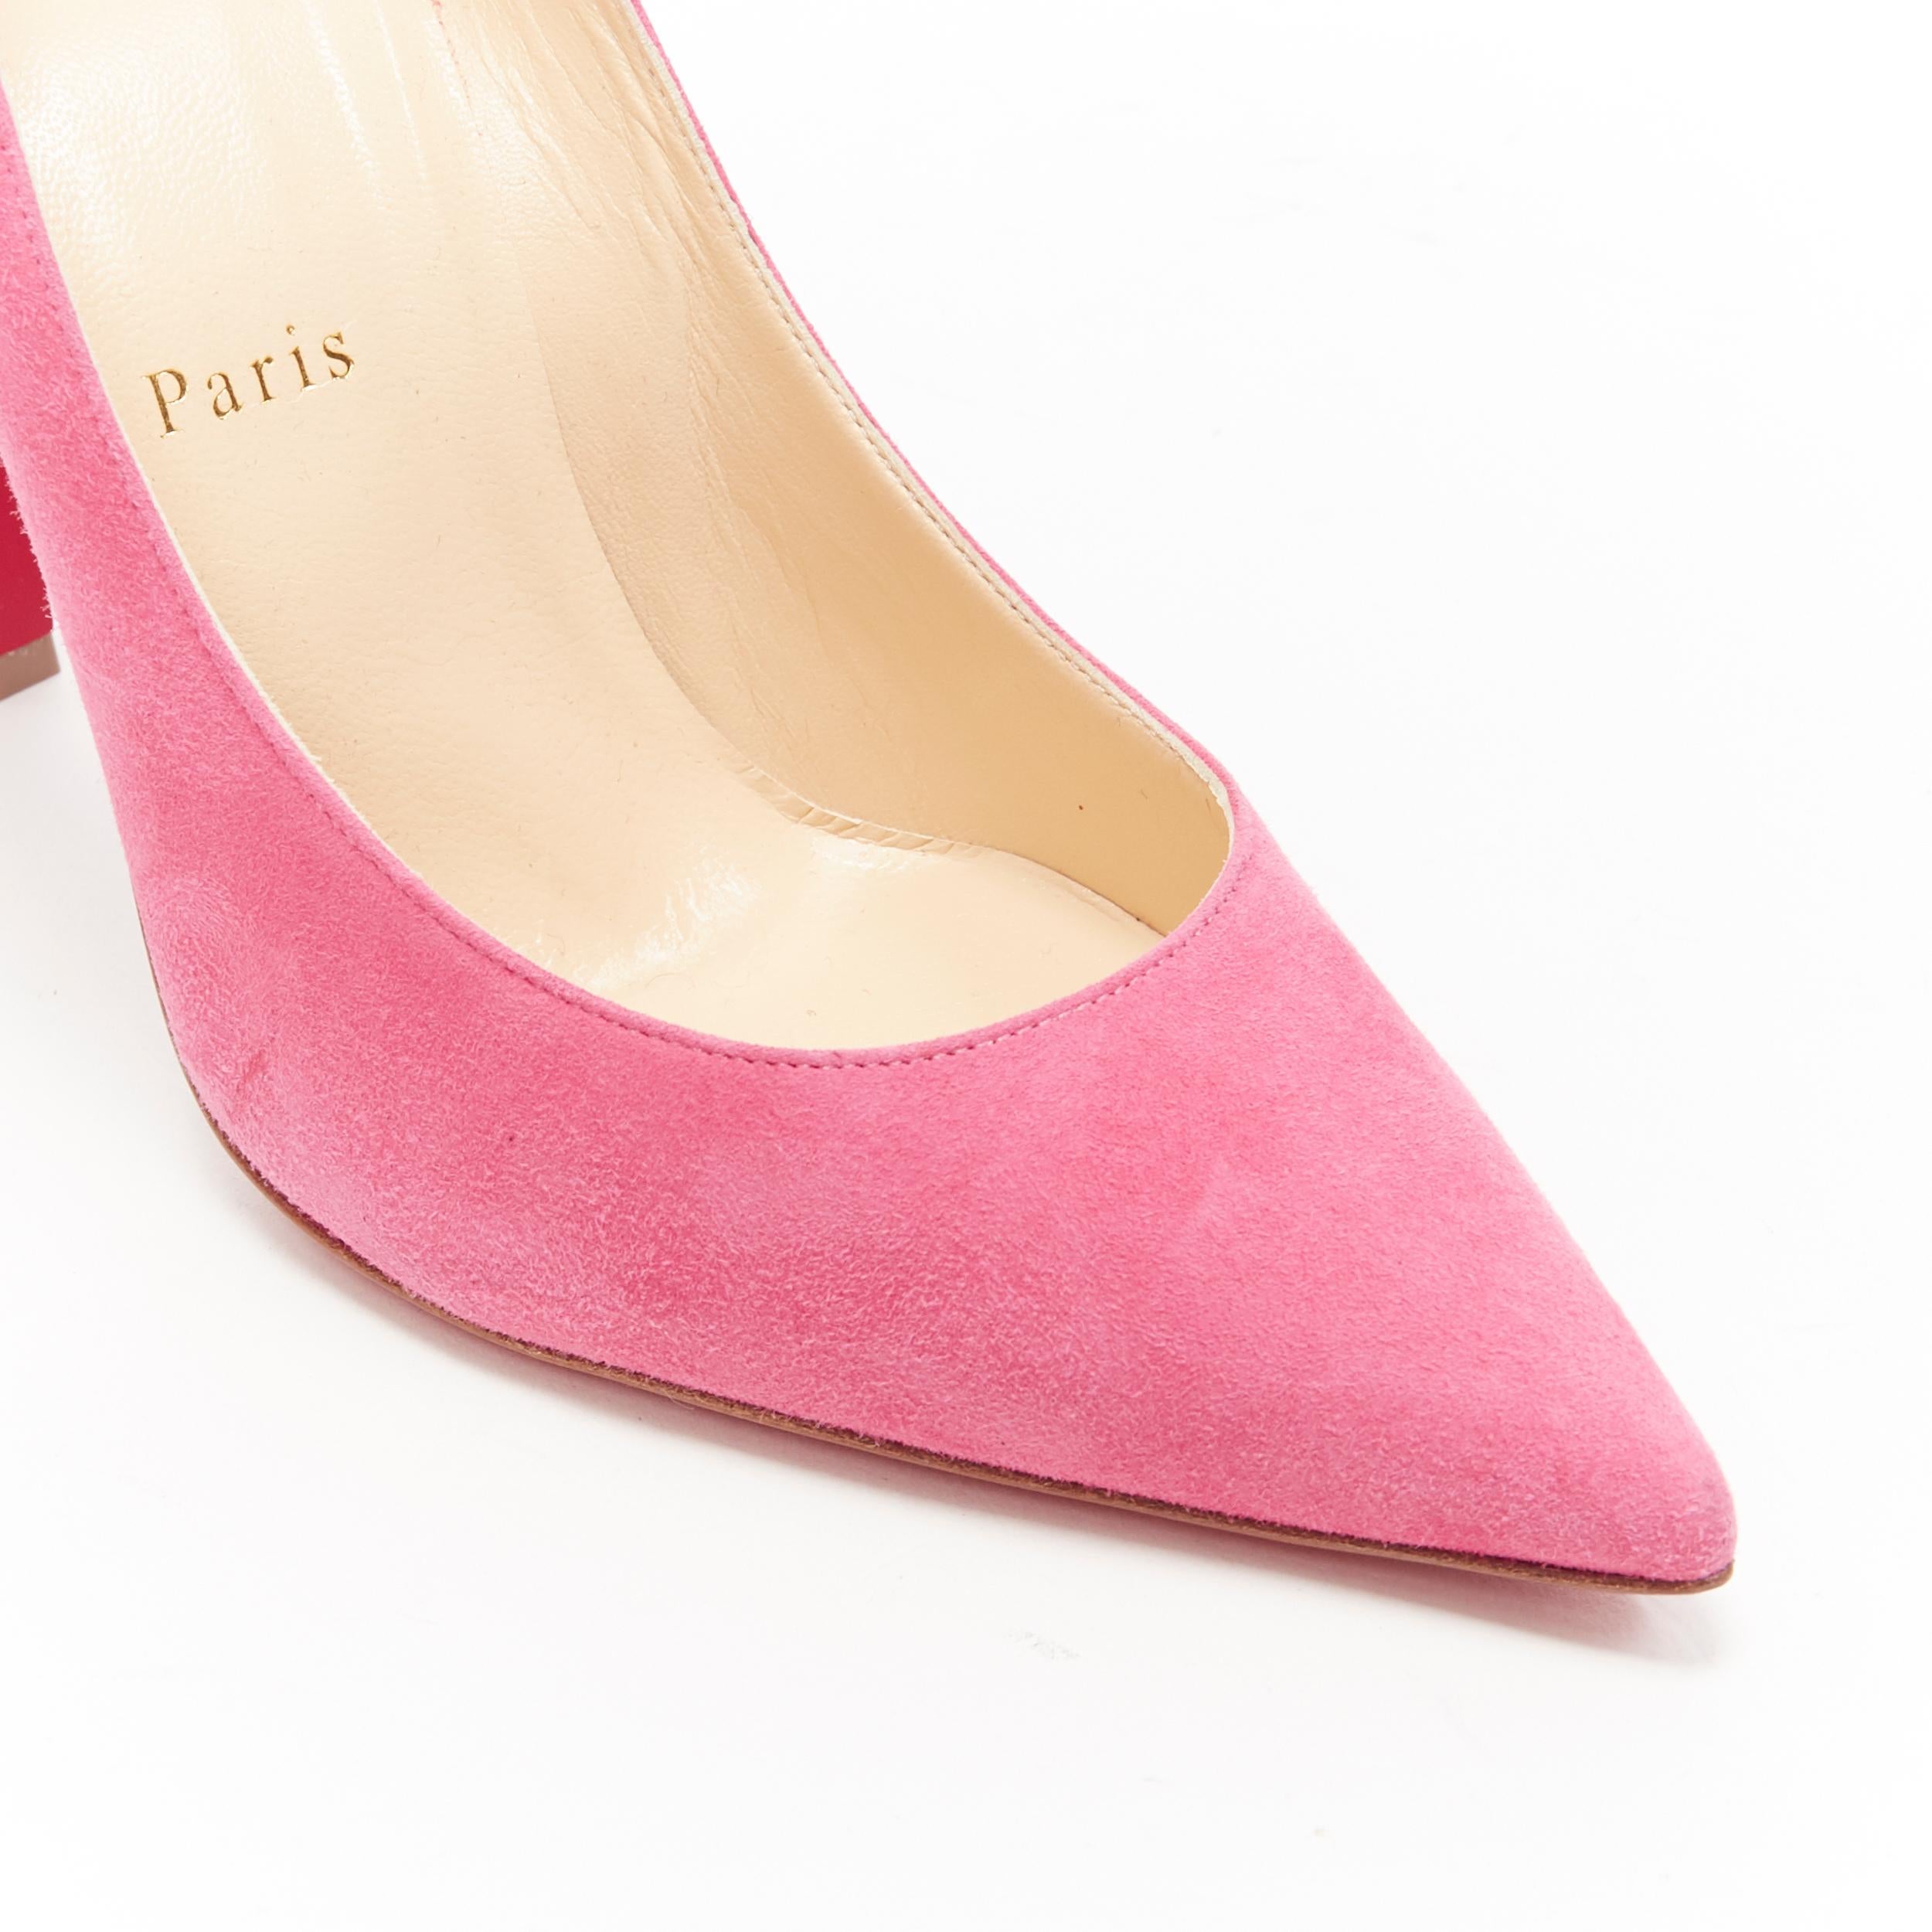 CHRISTIAN LOUBOUTIN pink suede leather pointy toe stiletto pigalle pump EU38 2